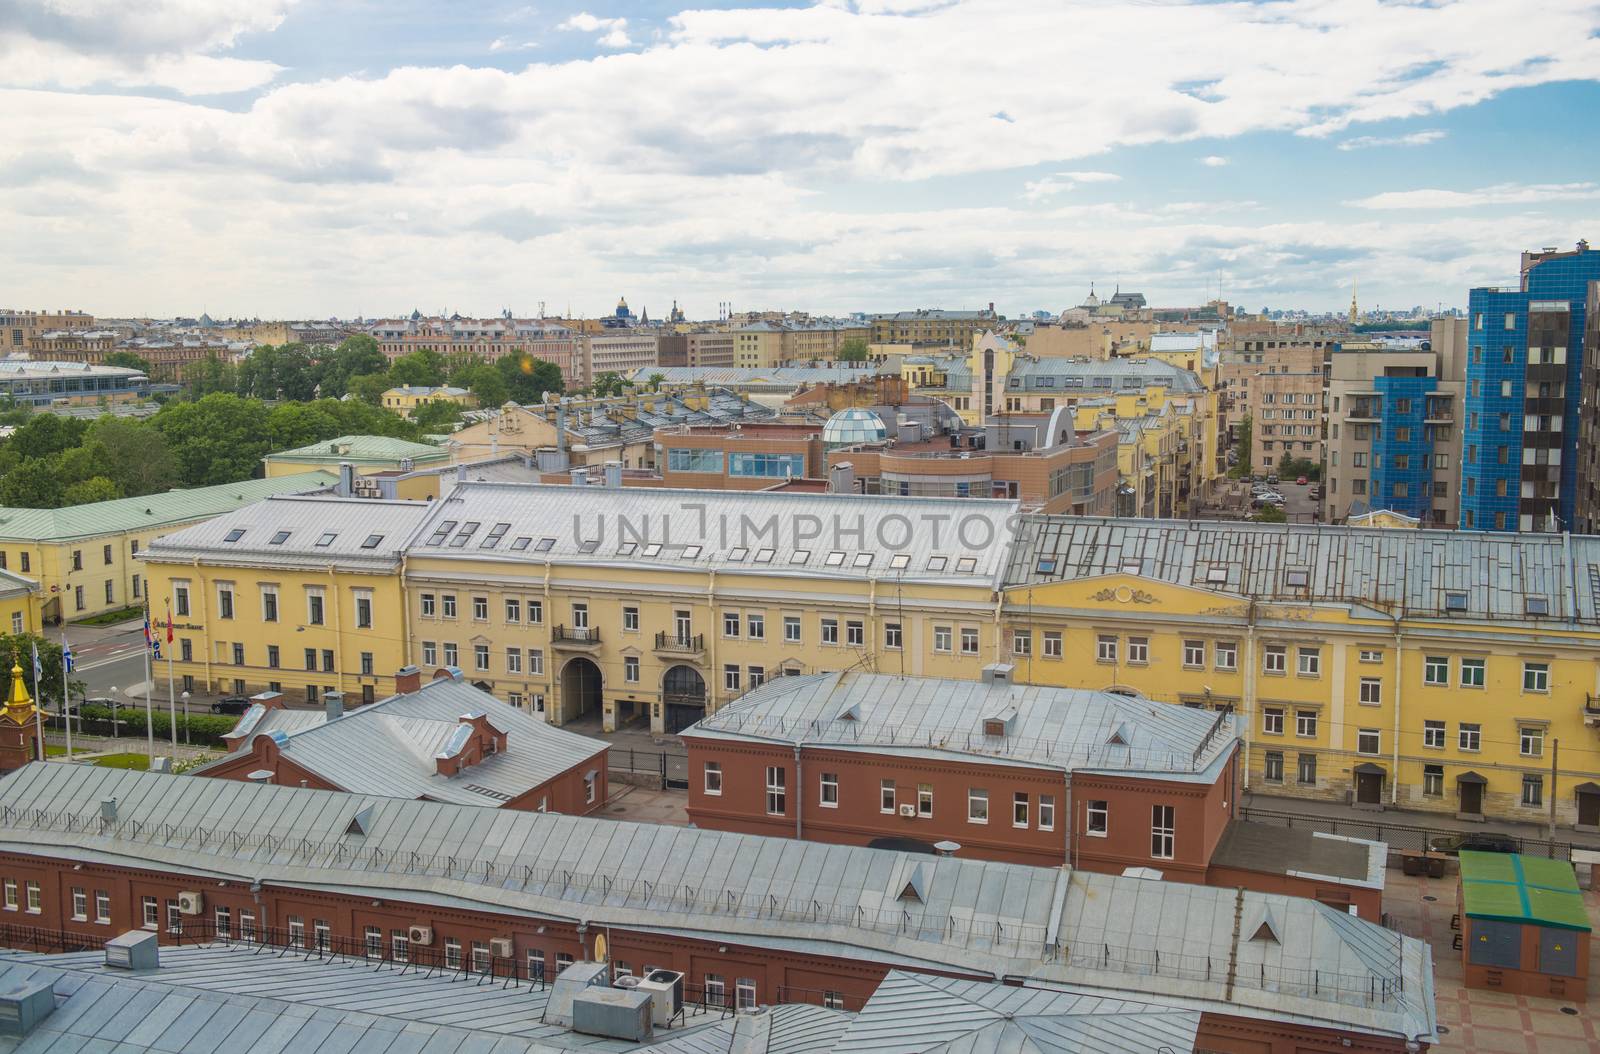 The roofs of Sankt Petersburg by Alenmax